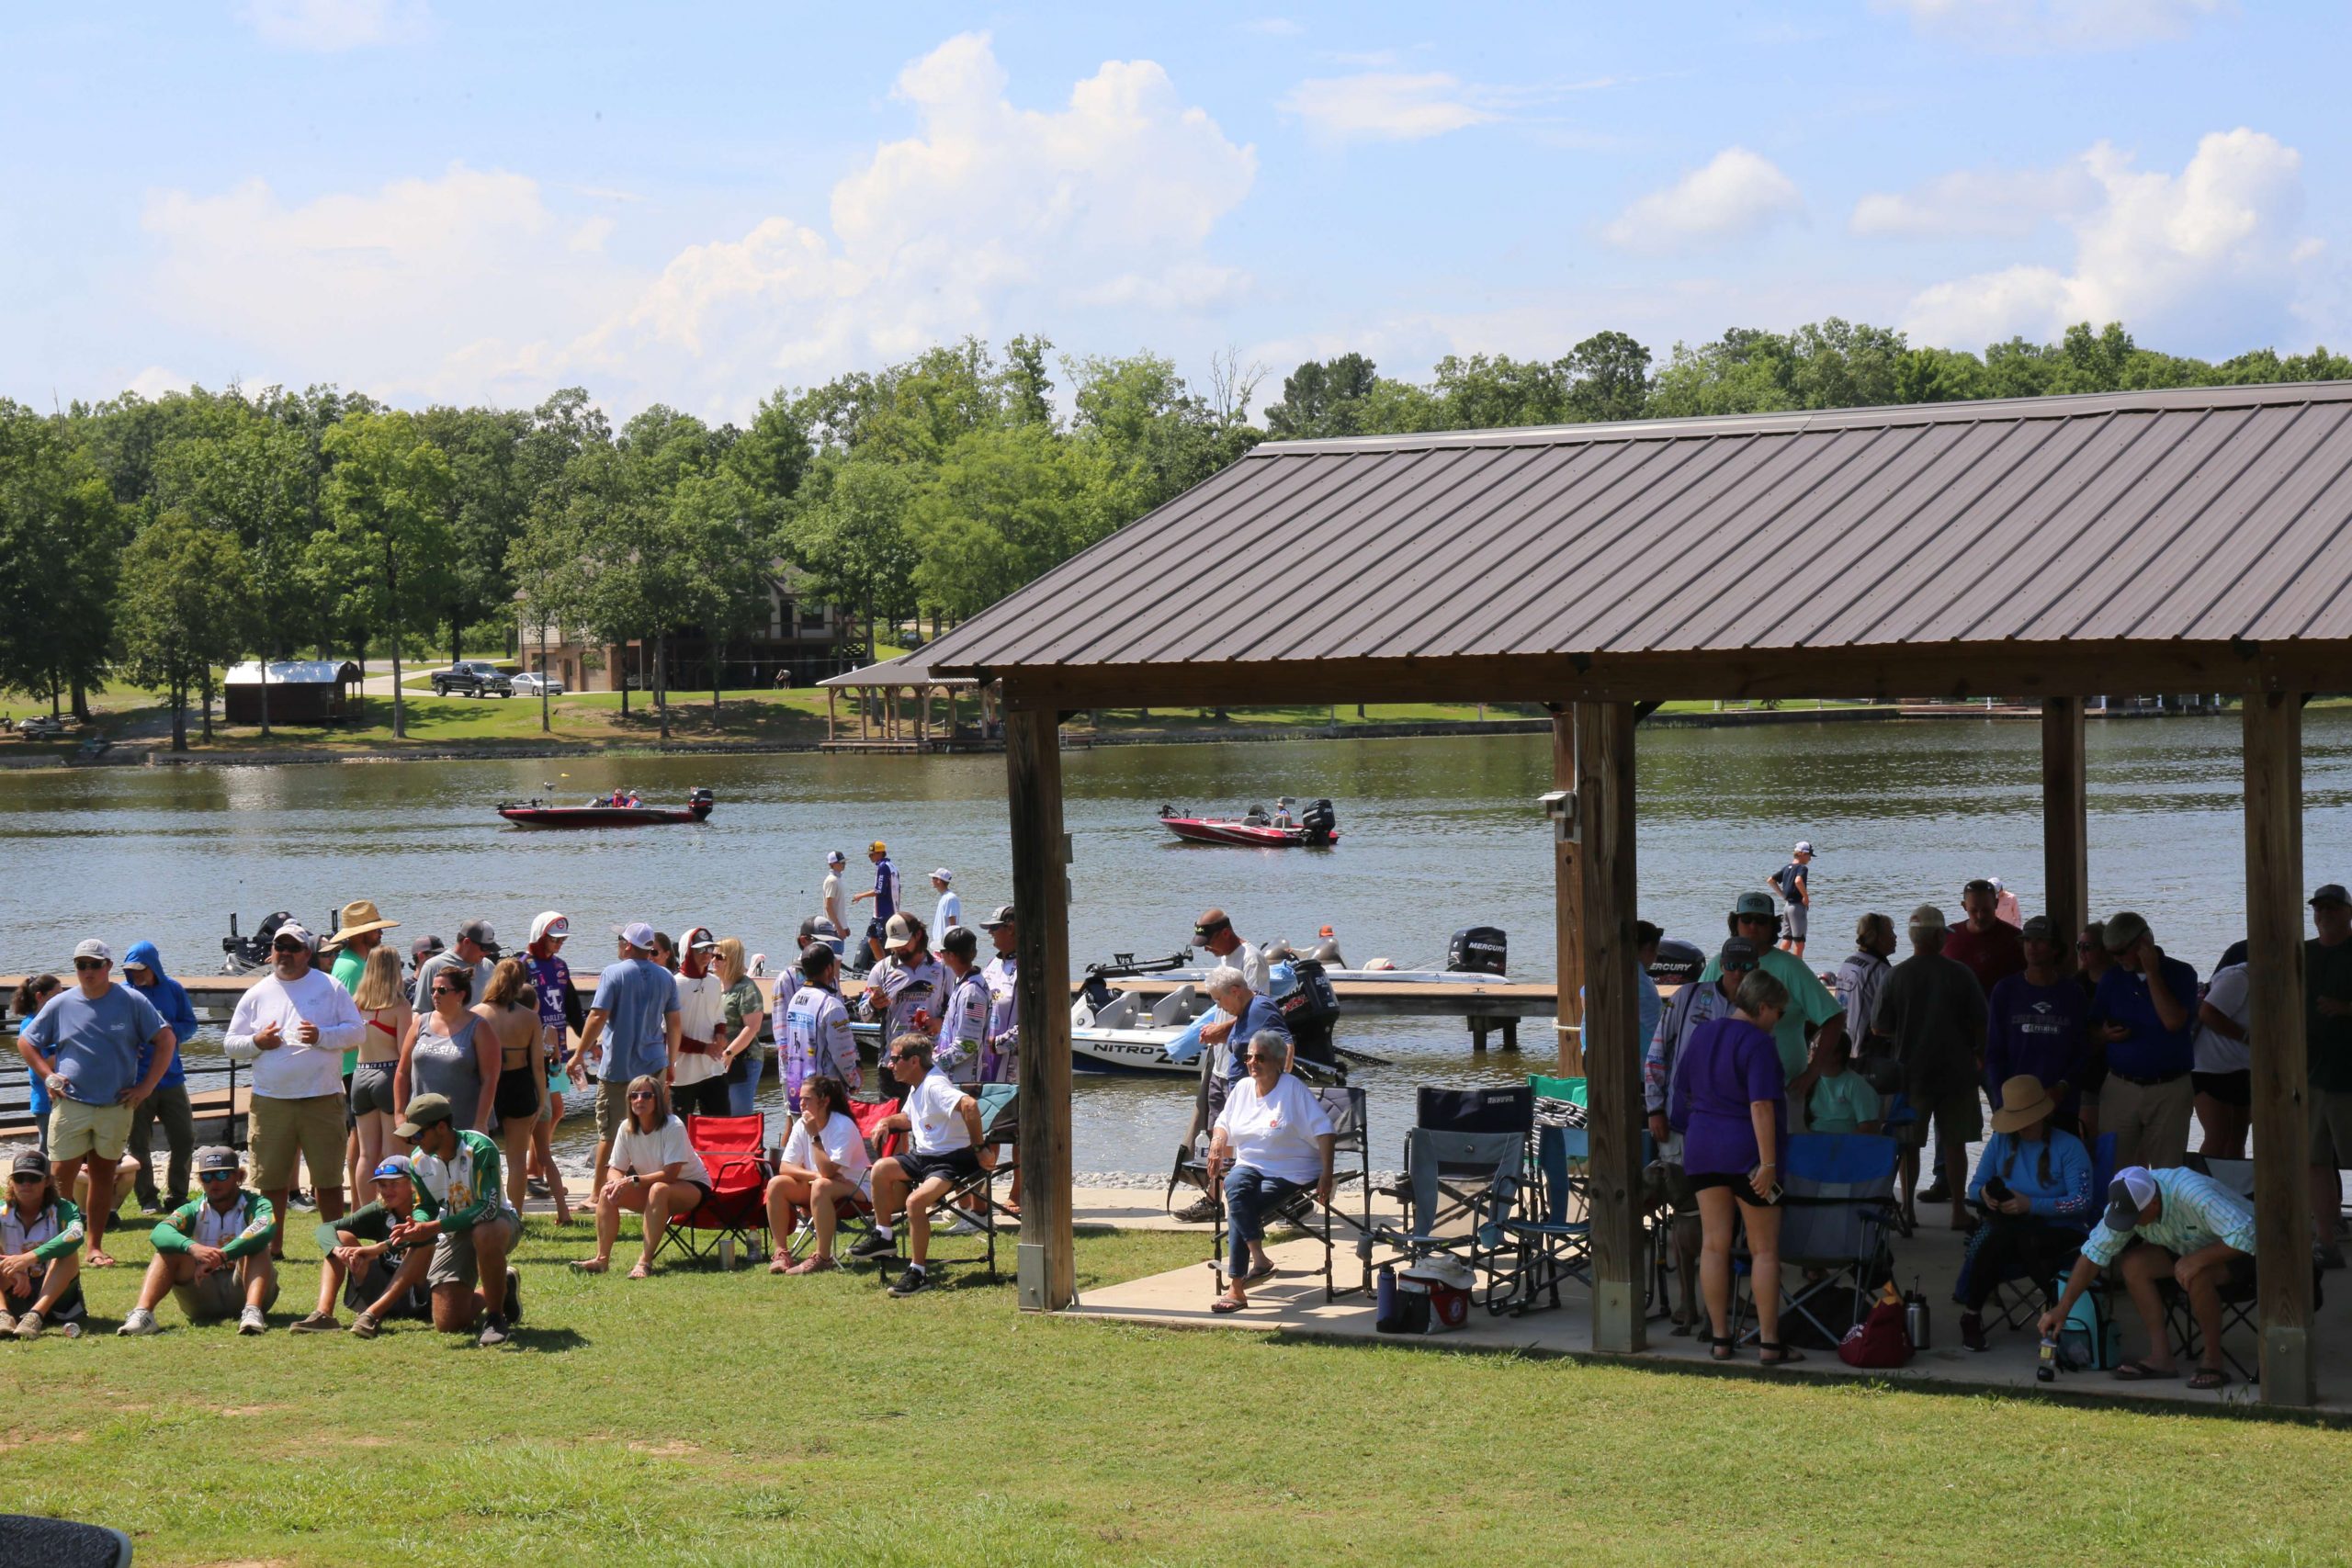 Family, friends and fans came out to cheer on the teams as they try and qualify for the National Championship at the Carhartt Bassmaster College Series Wild Card on Lay Lake presented by Bass Pro Shops